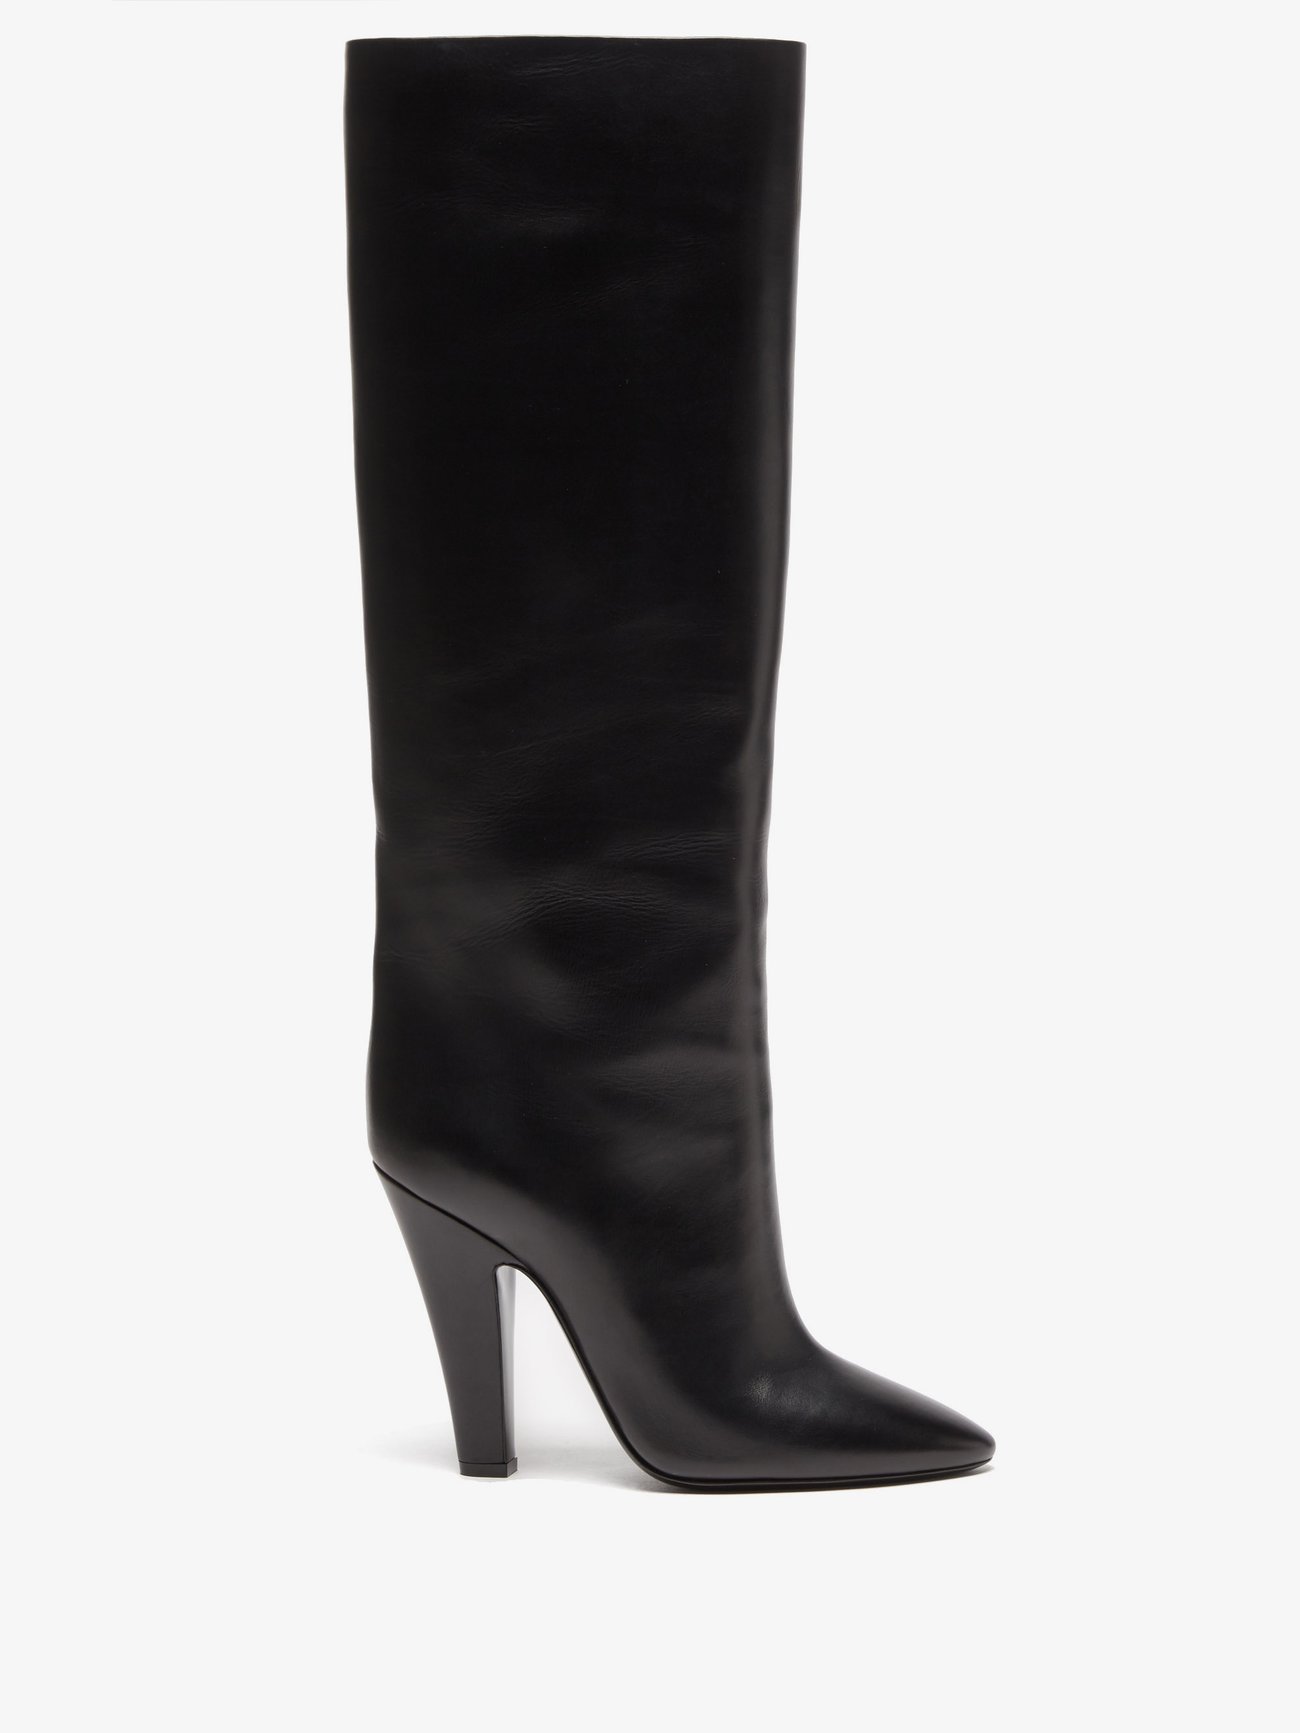 68 Tube leather knee-high boots